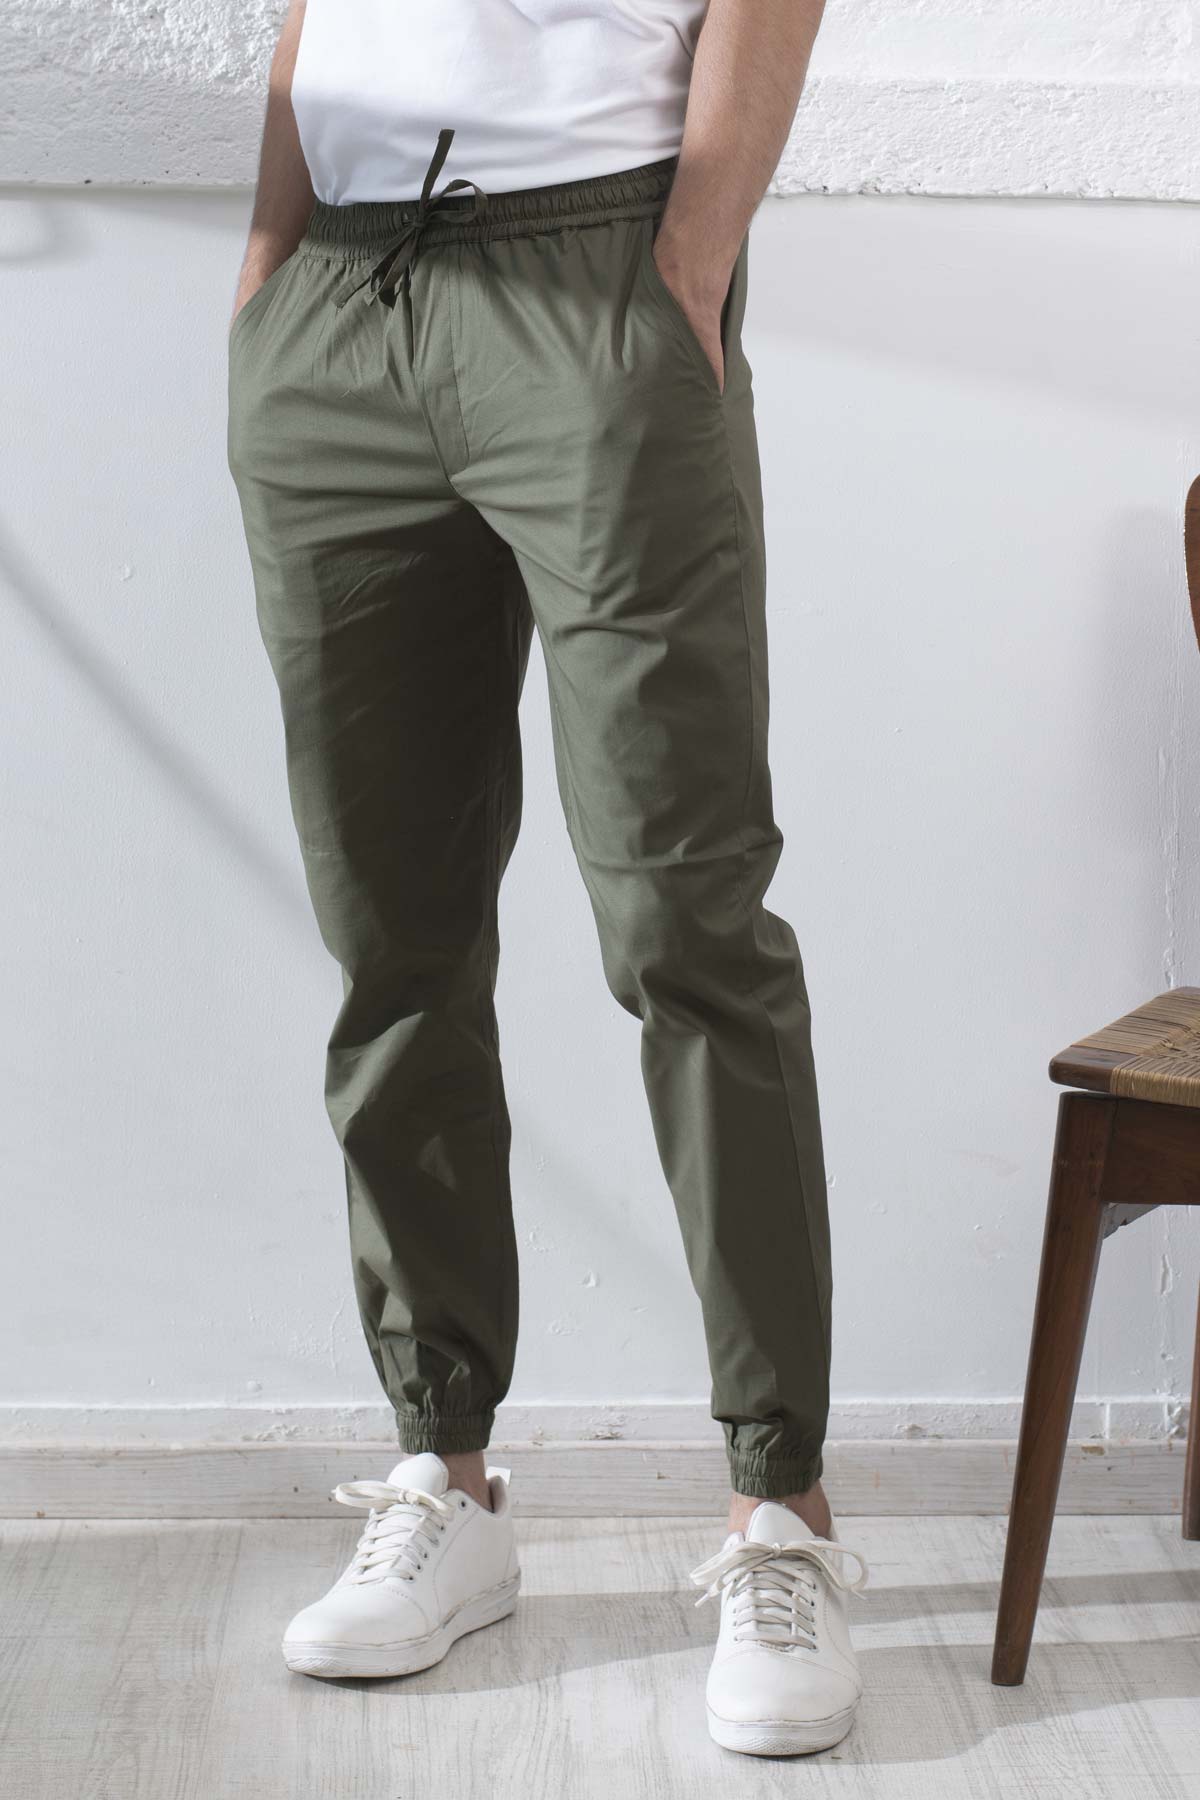 Buy Olive Trousers & Pants for Men by BEYOURS Online